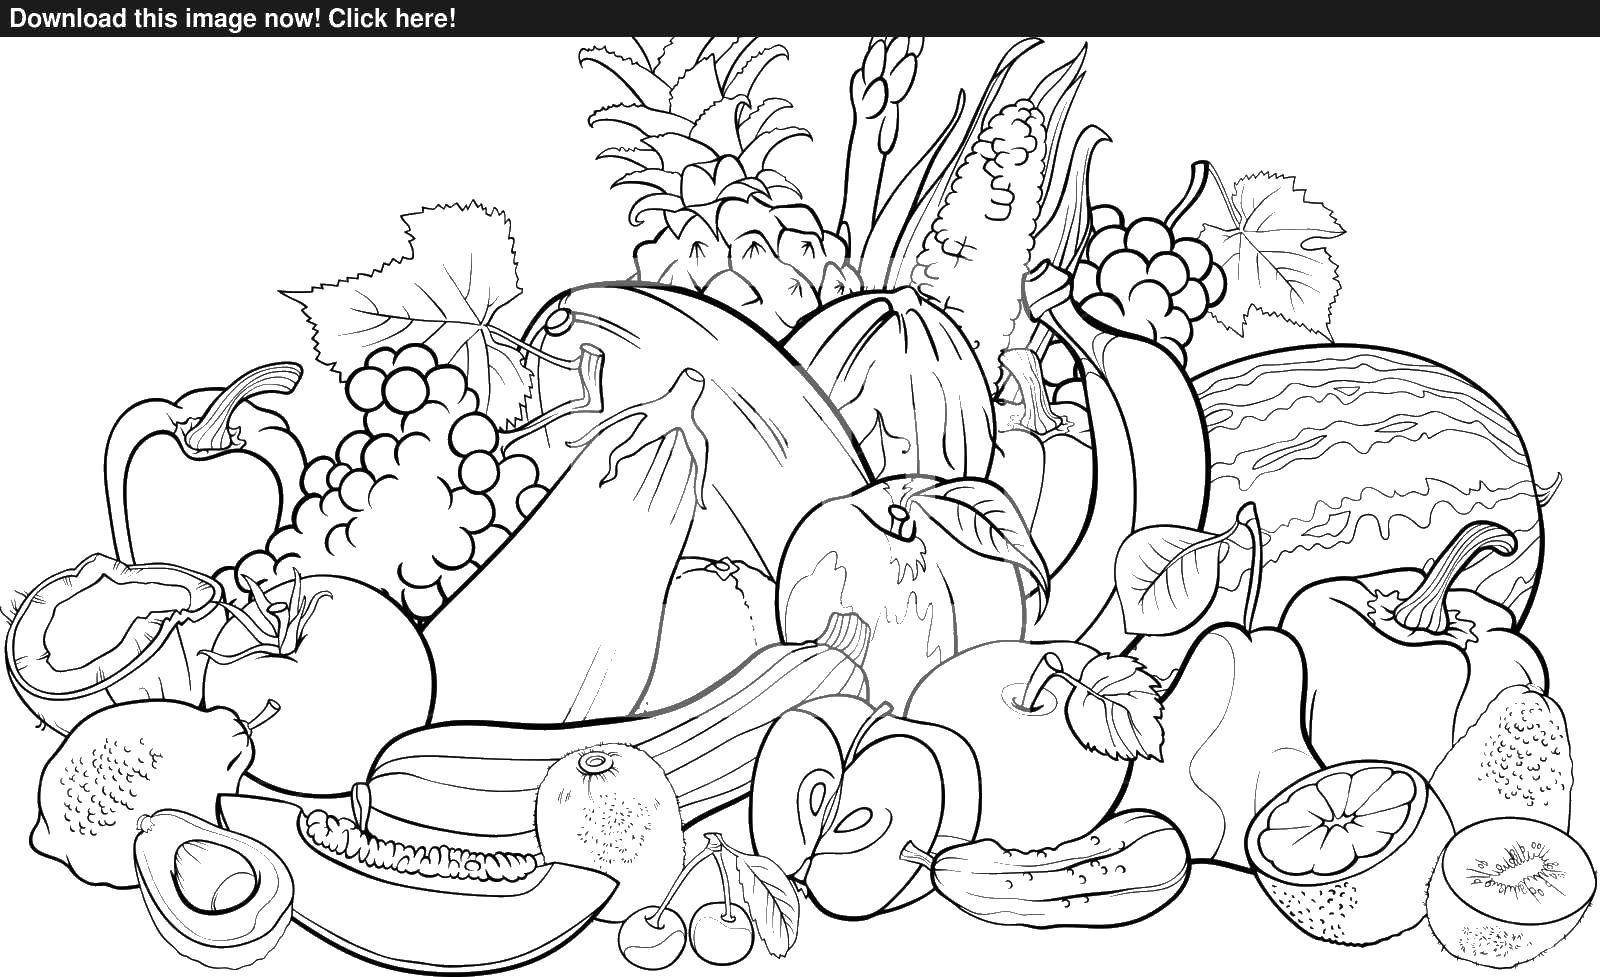 Coloring Fruits and berries. Category fruits. Tags:  fruits, berries.